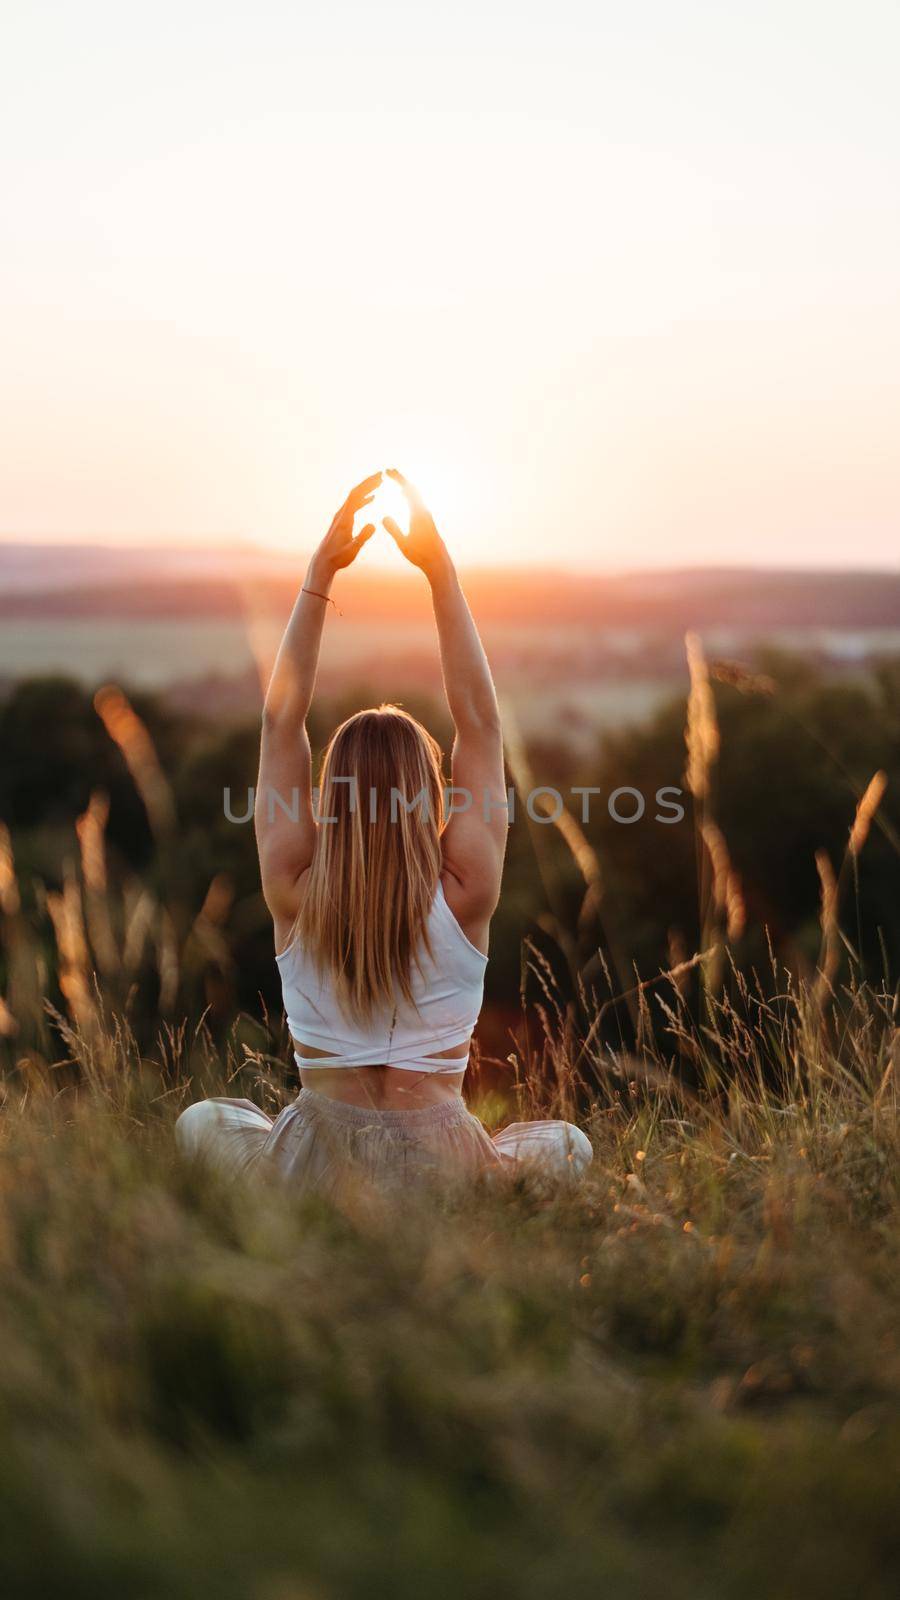 Back View on Woman Sitting in Meditation Yoga Pose and Catching Sun by Her Hands at Sunset Outdoors